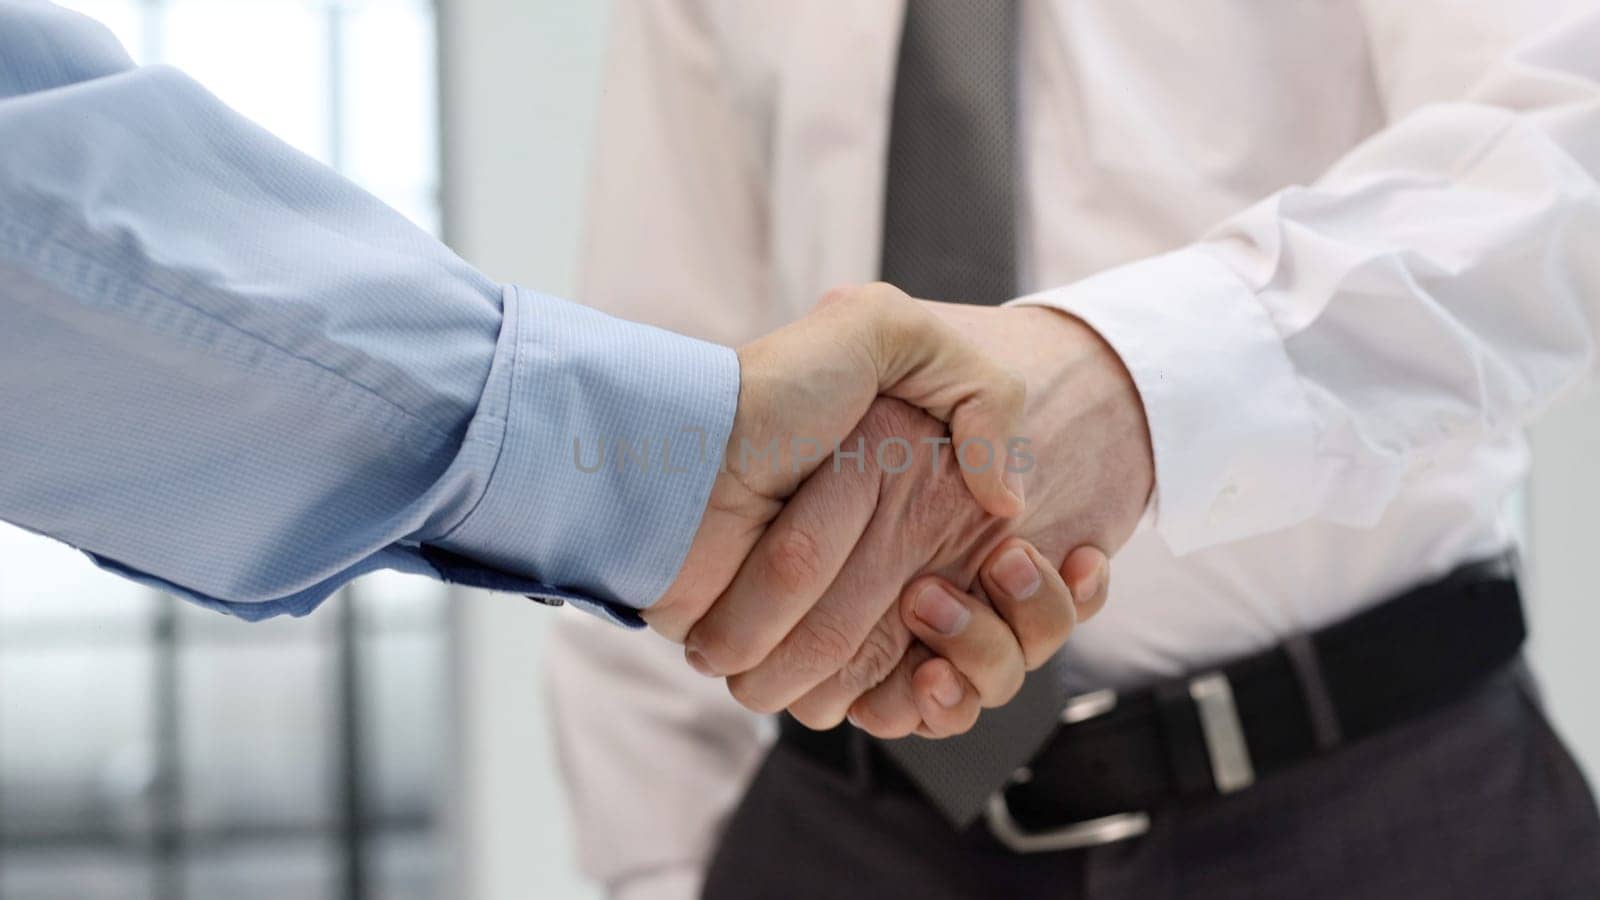 Handshake and congratulations after the transaction.